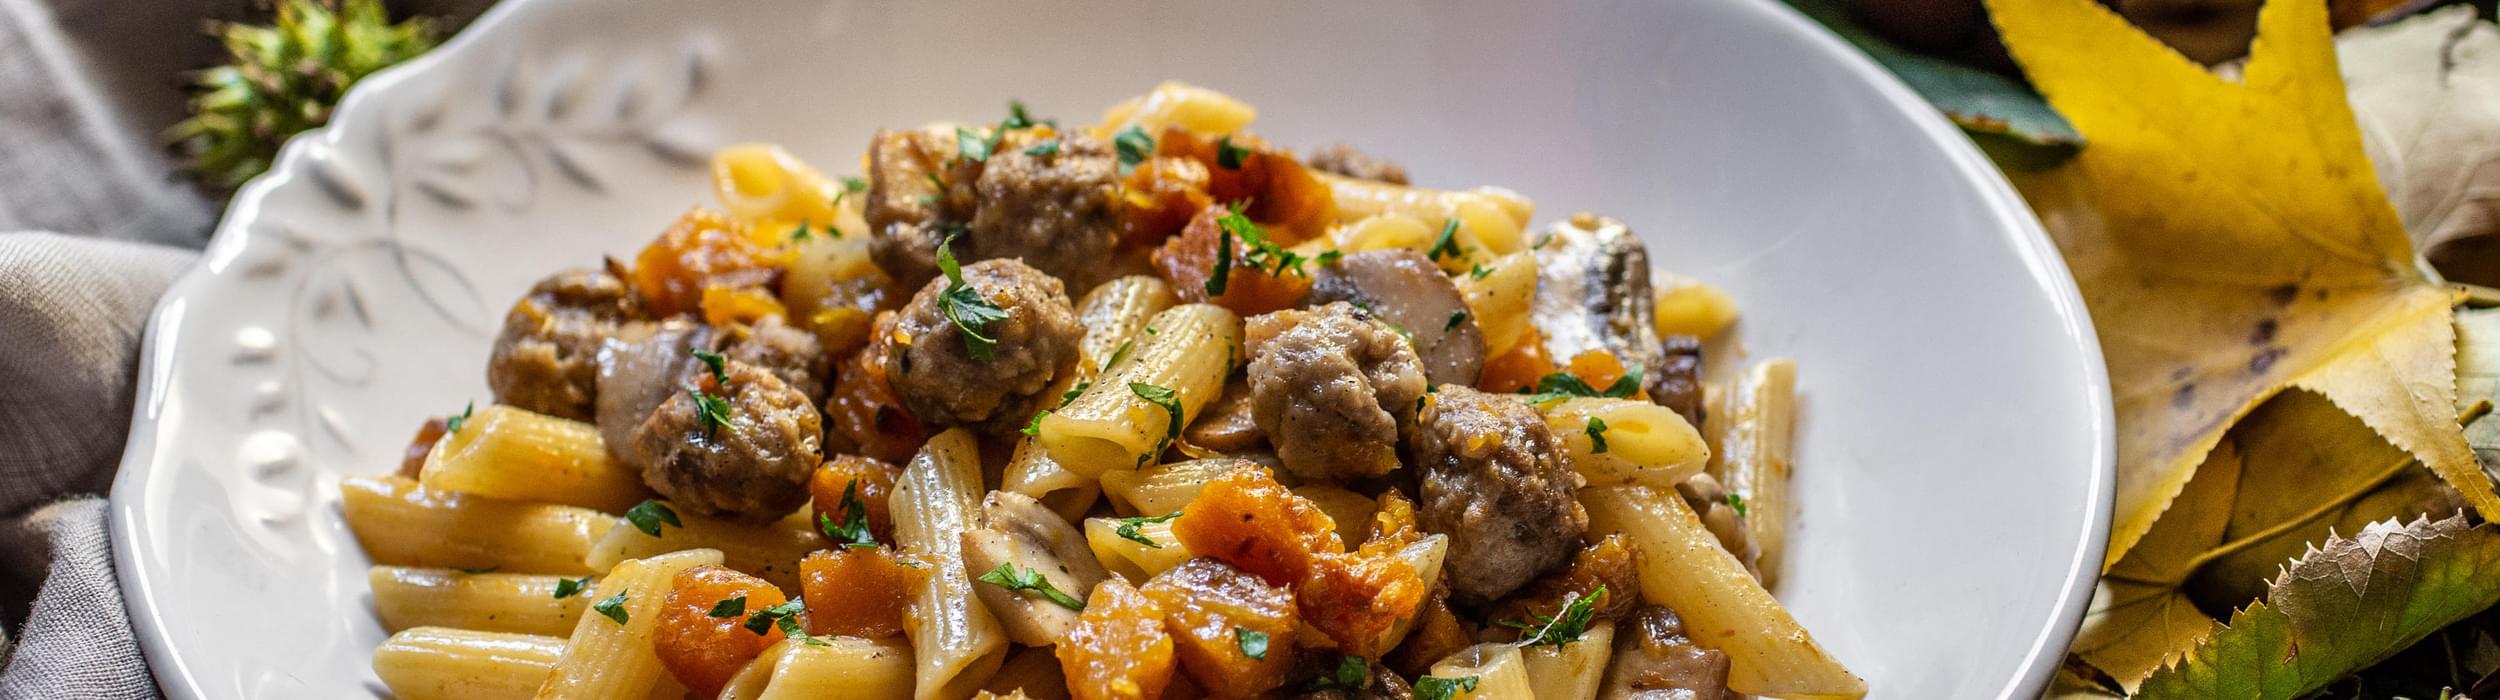 Penne with Pumpkin, Mushrooms, and Beef Meatballs Image